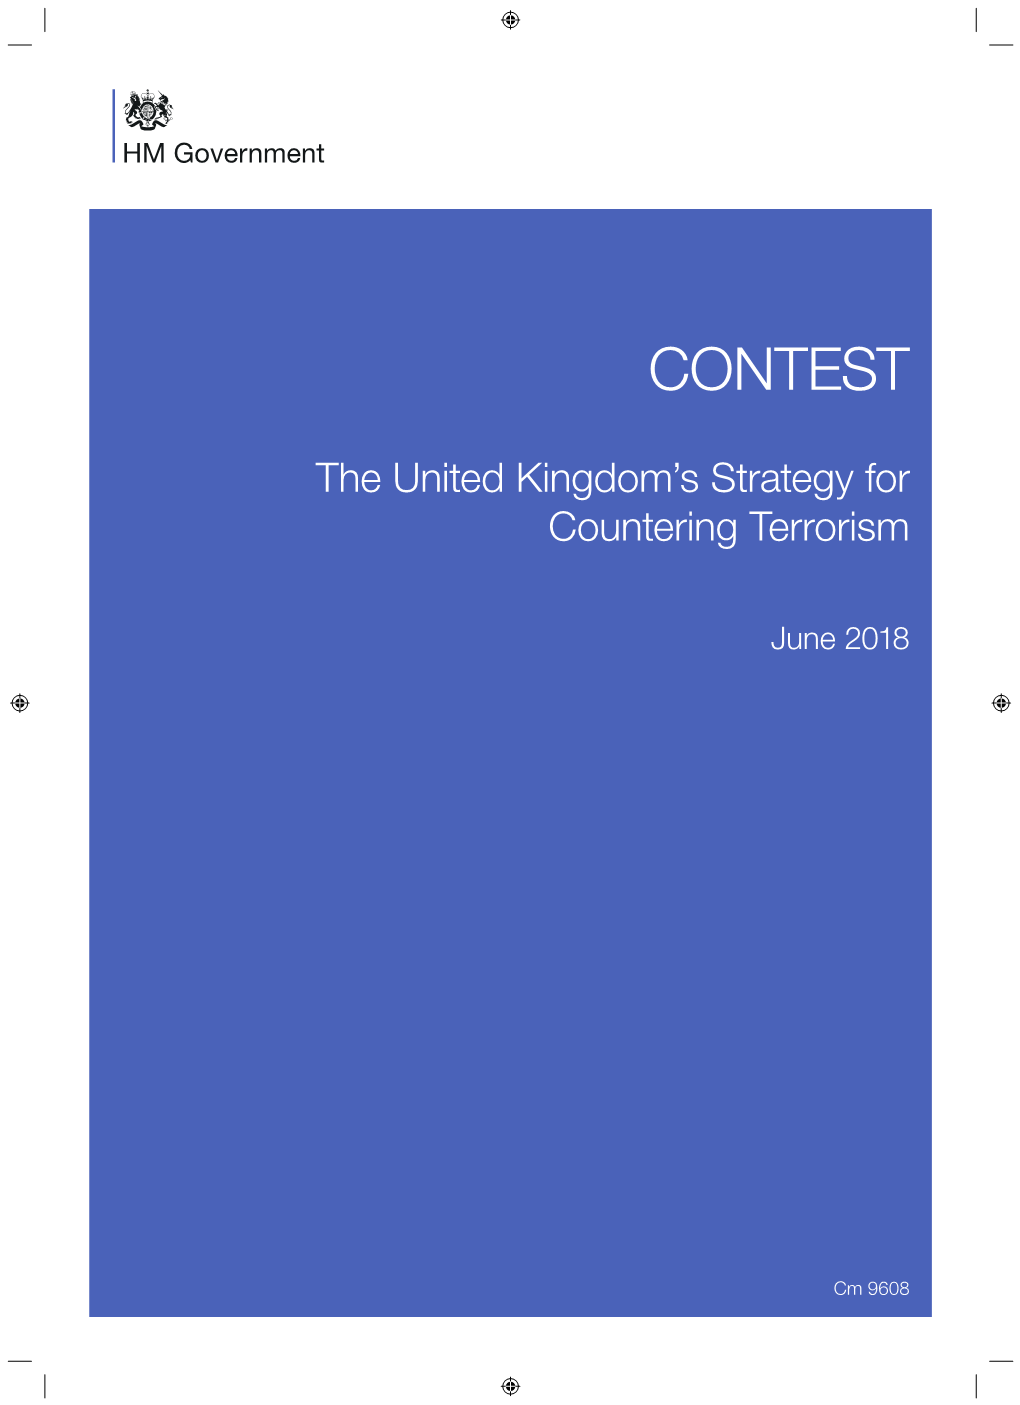 CONTEST: the United Kingdom's Strategy for Countering Terrorism